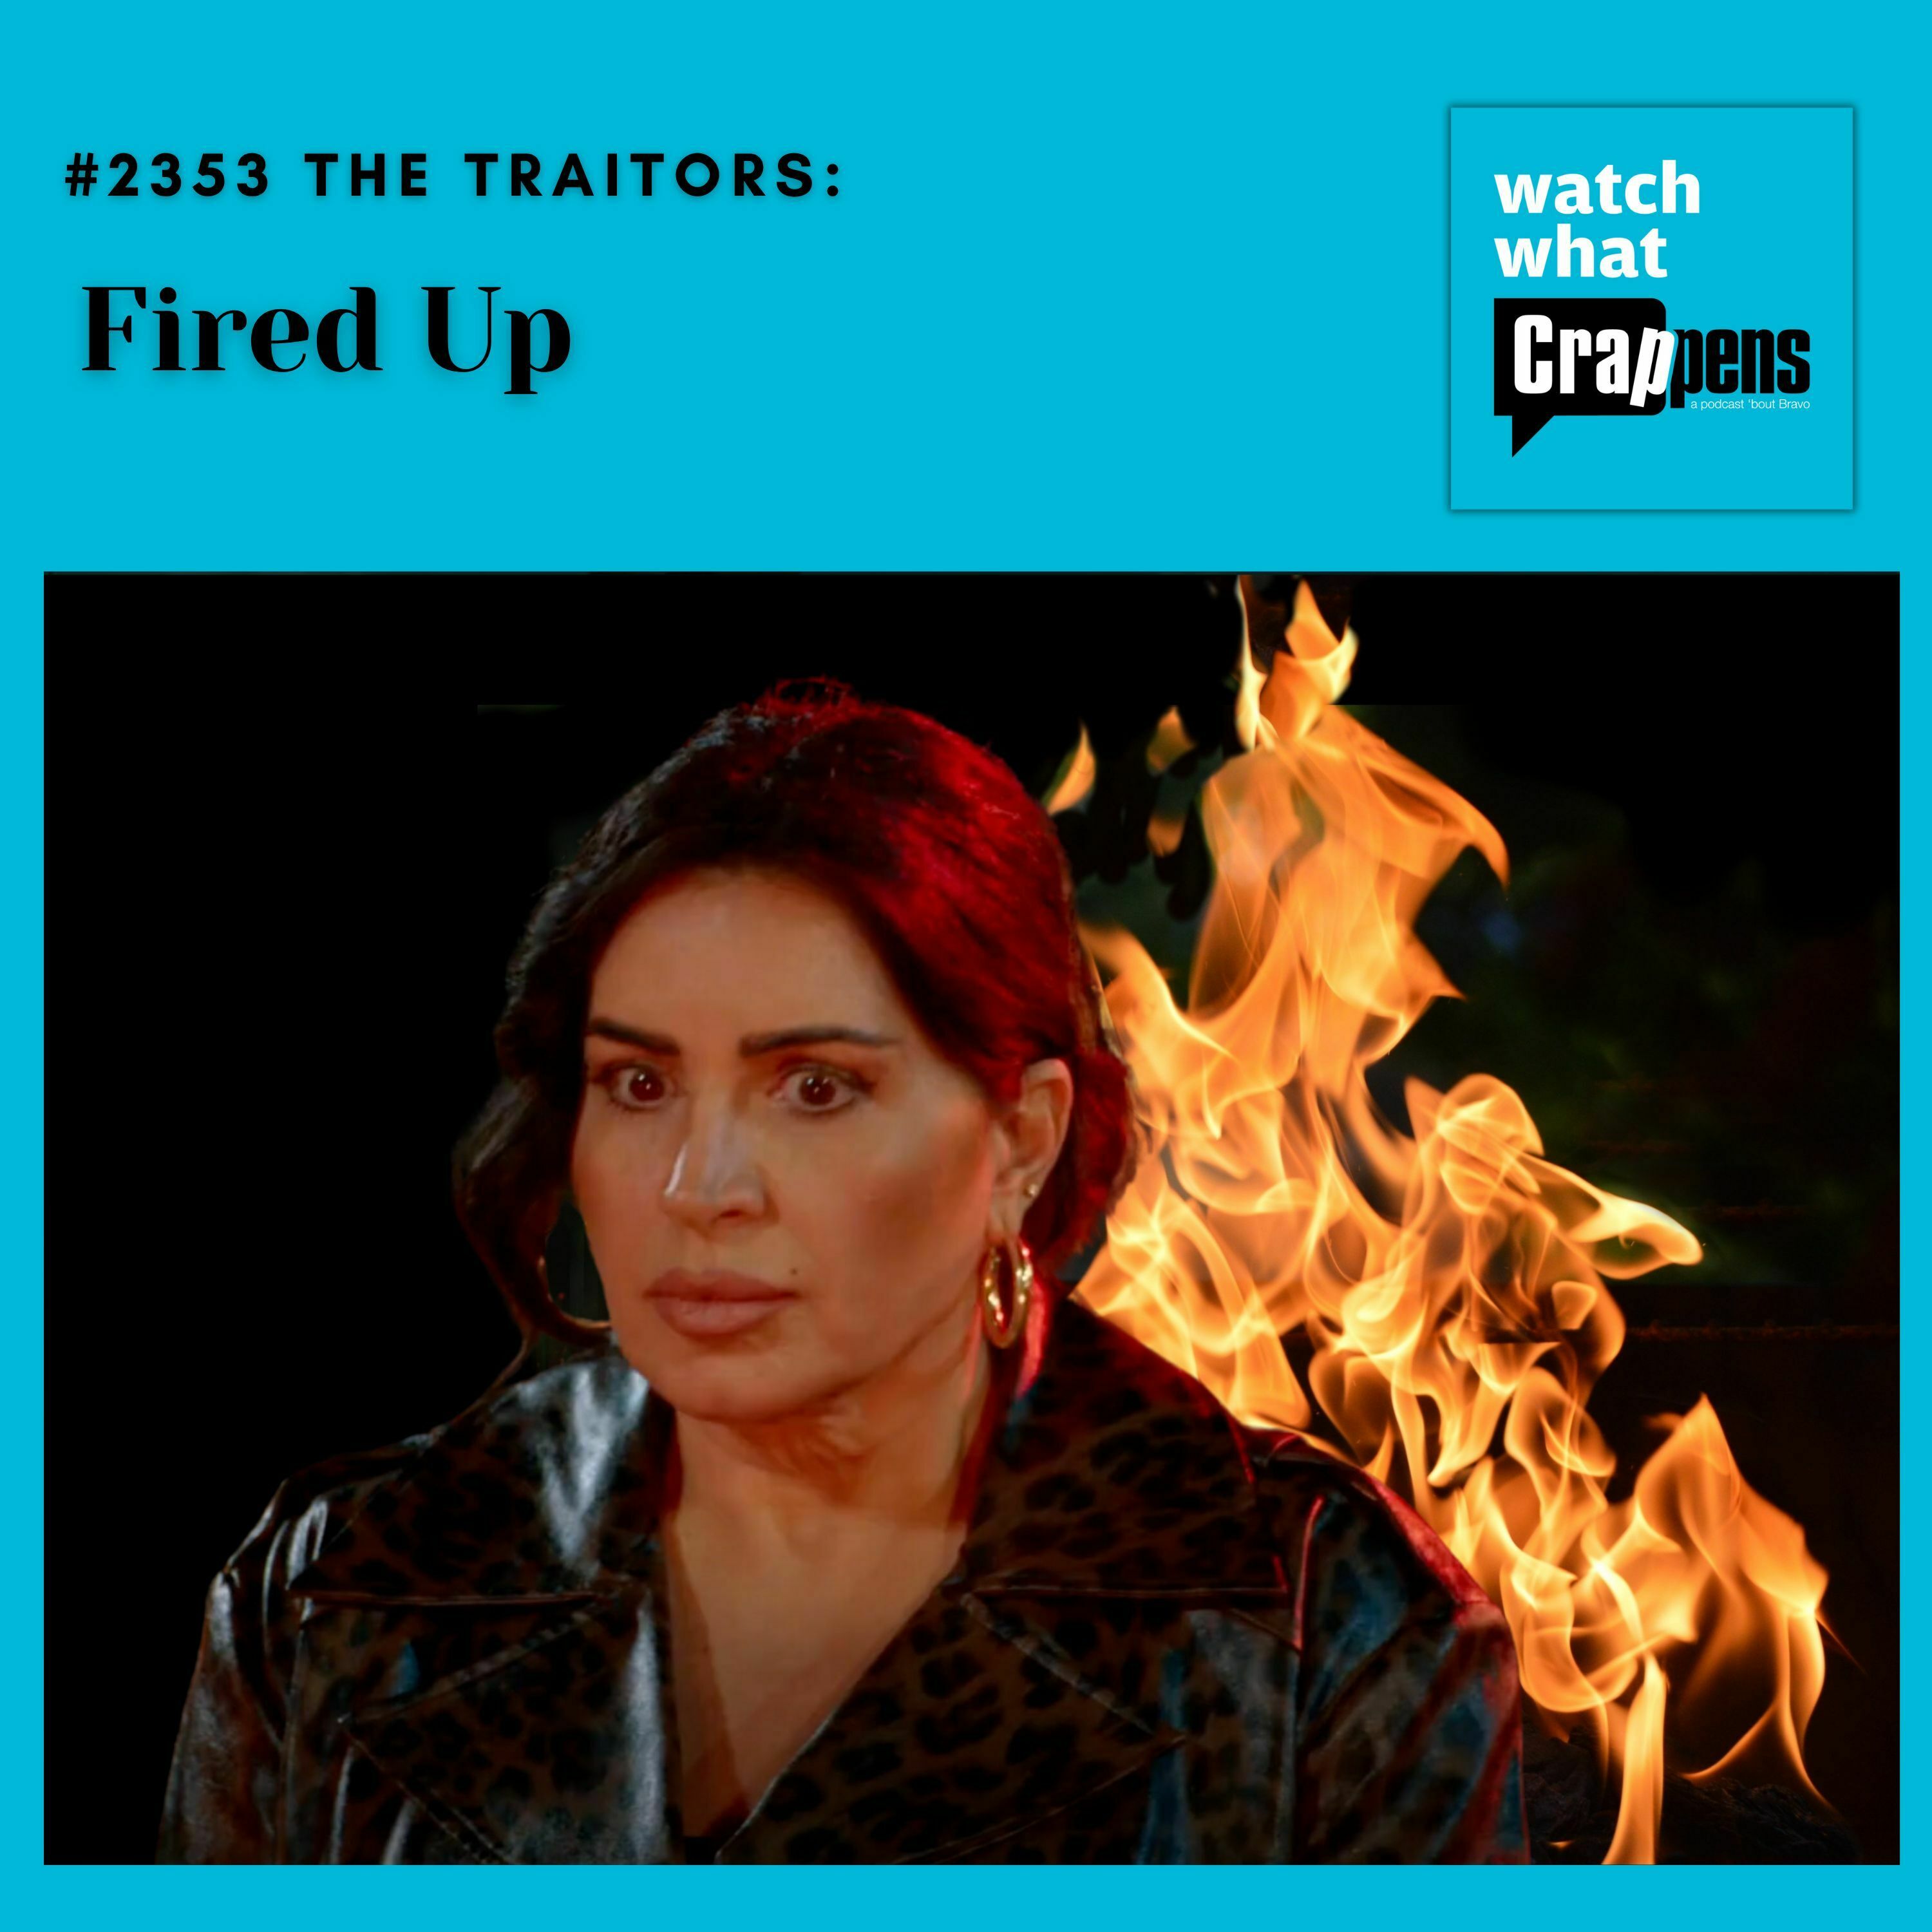 #2353 The Traitors: Fired Up